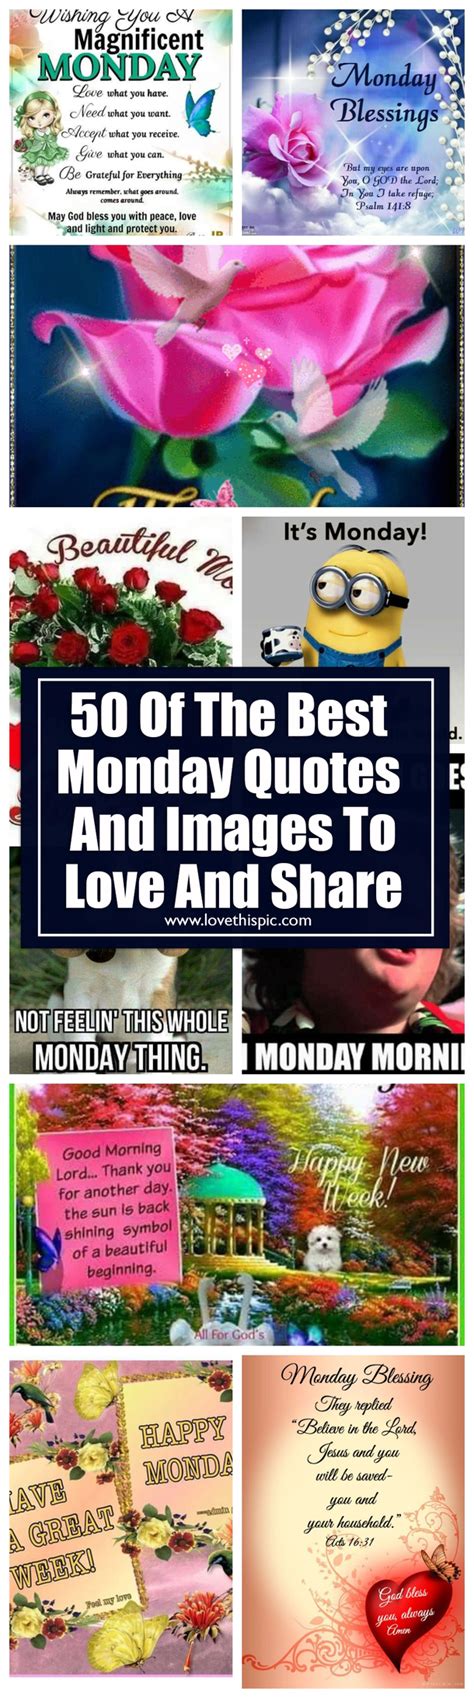 50 Of The Best Monday Quotes And Images To Love And Share Monday Quotes Happy Monday Quotes